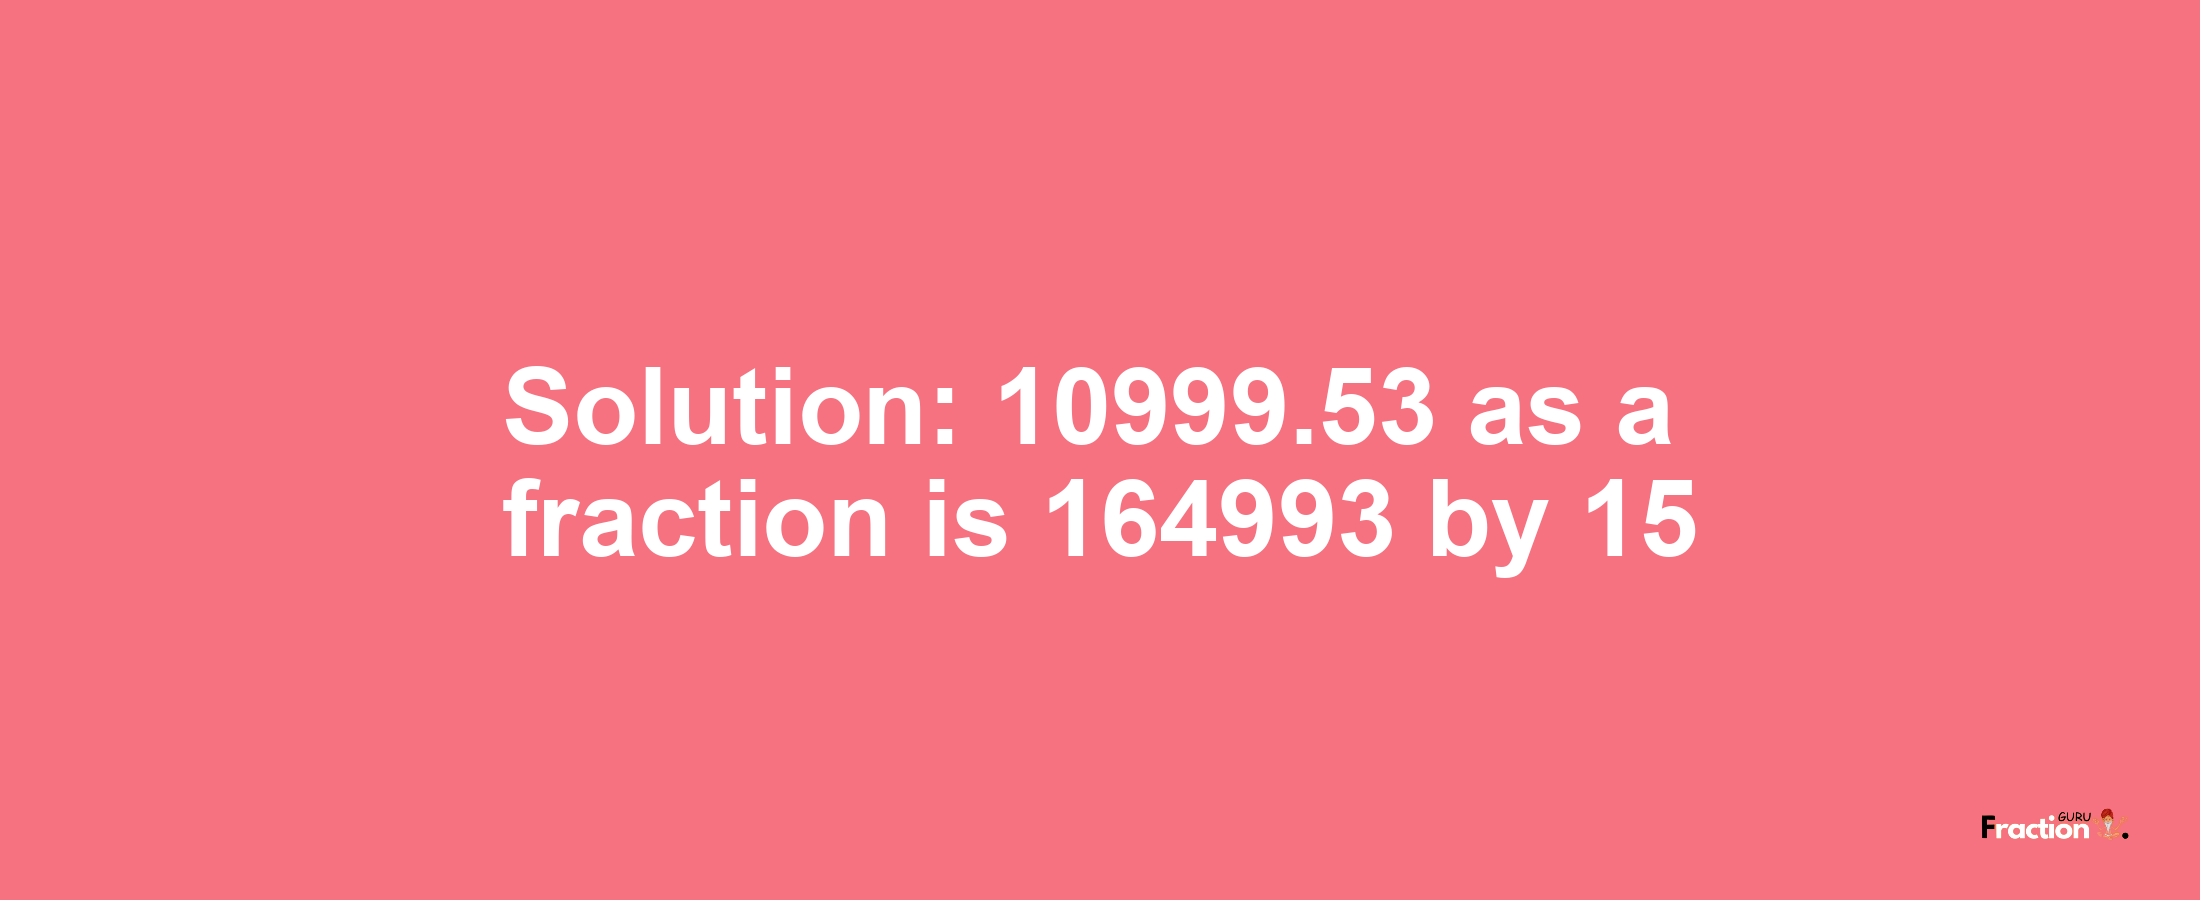 Solution:10999.53 as a fraction is 164993/15